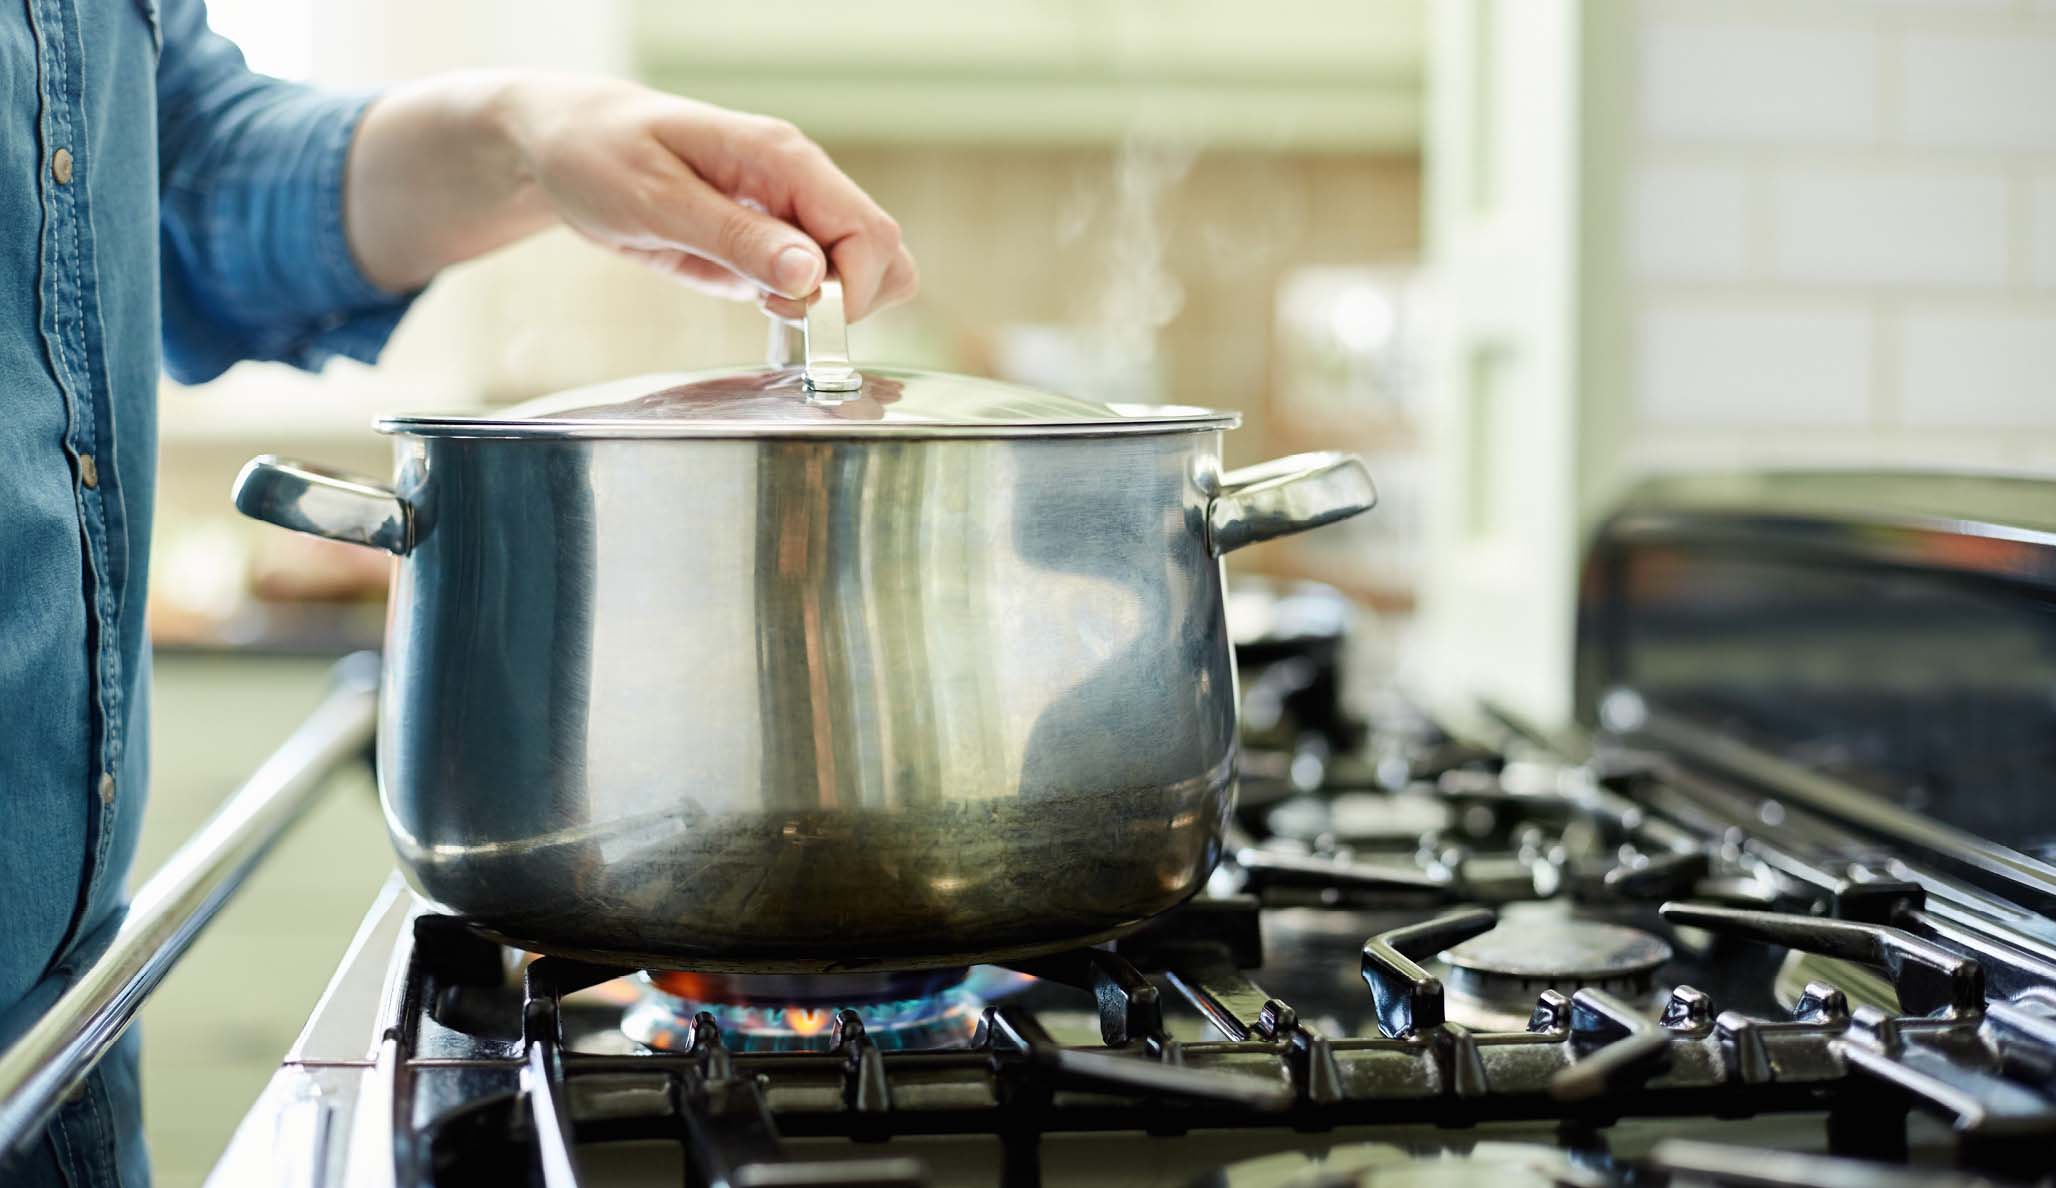 Propane vs. Natural Gas Stove: Which One Should You Choose?